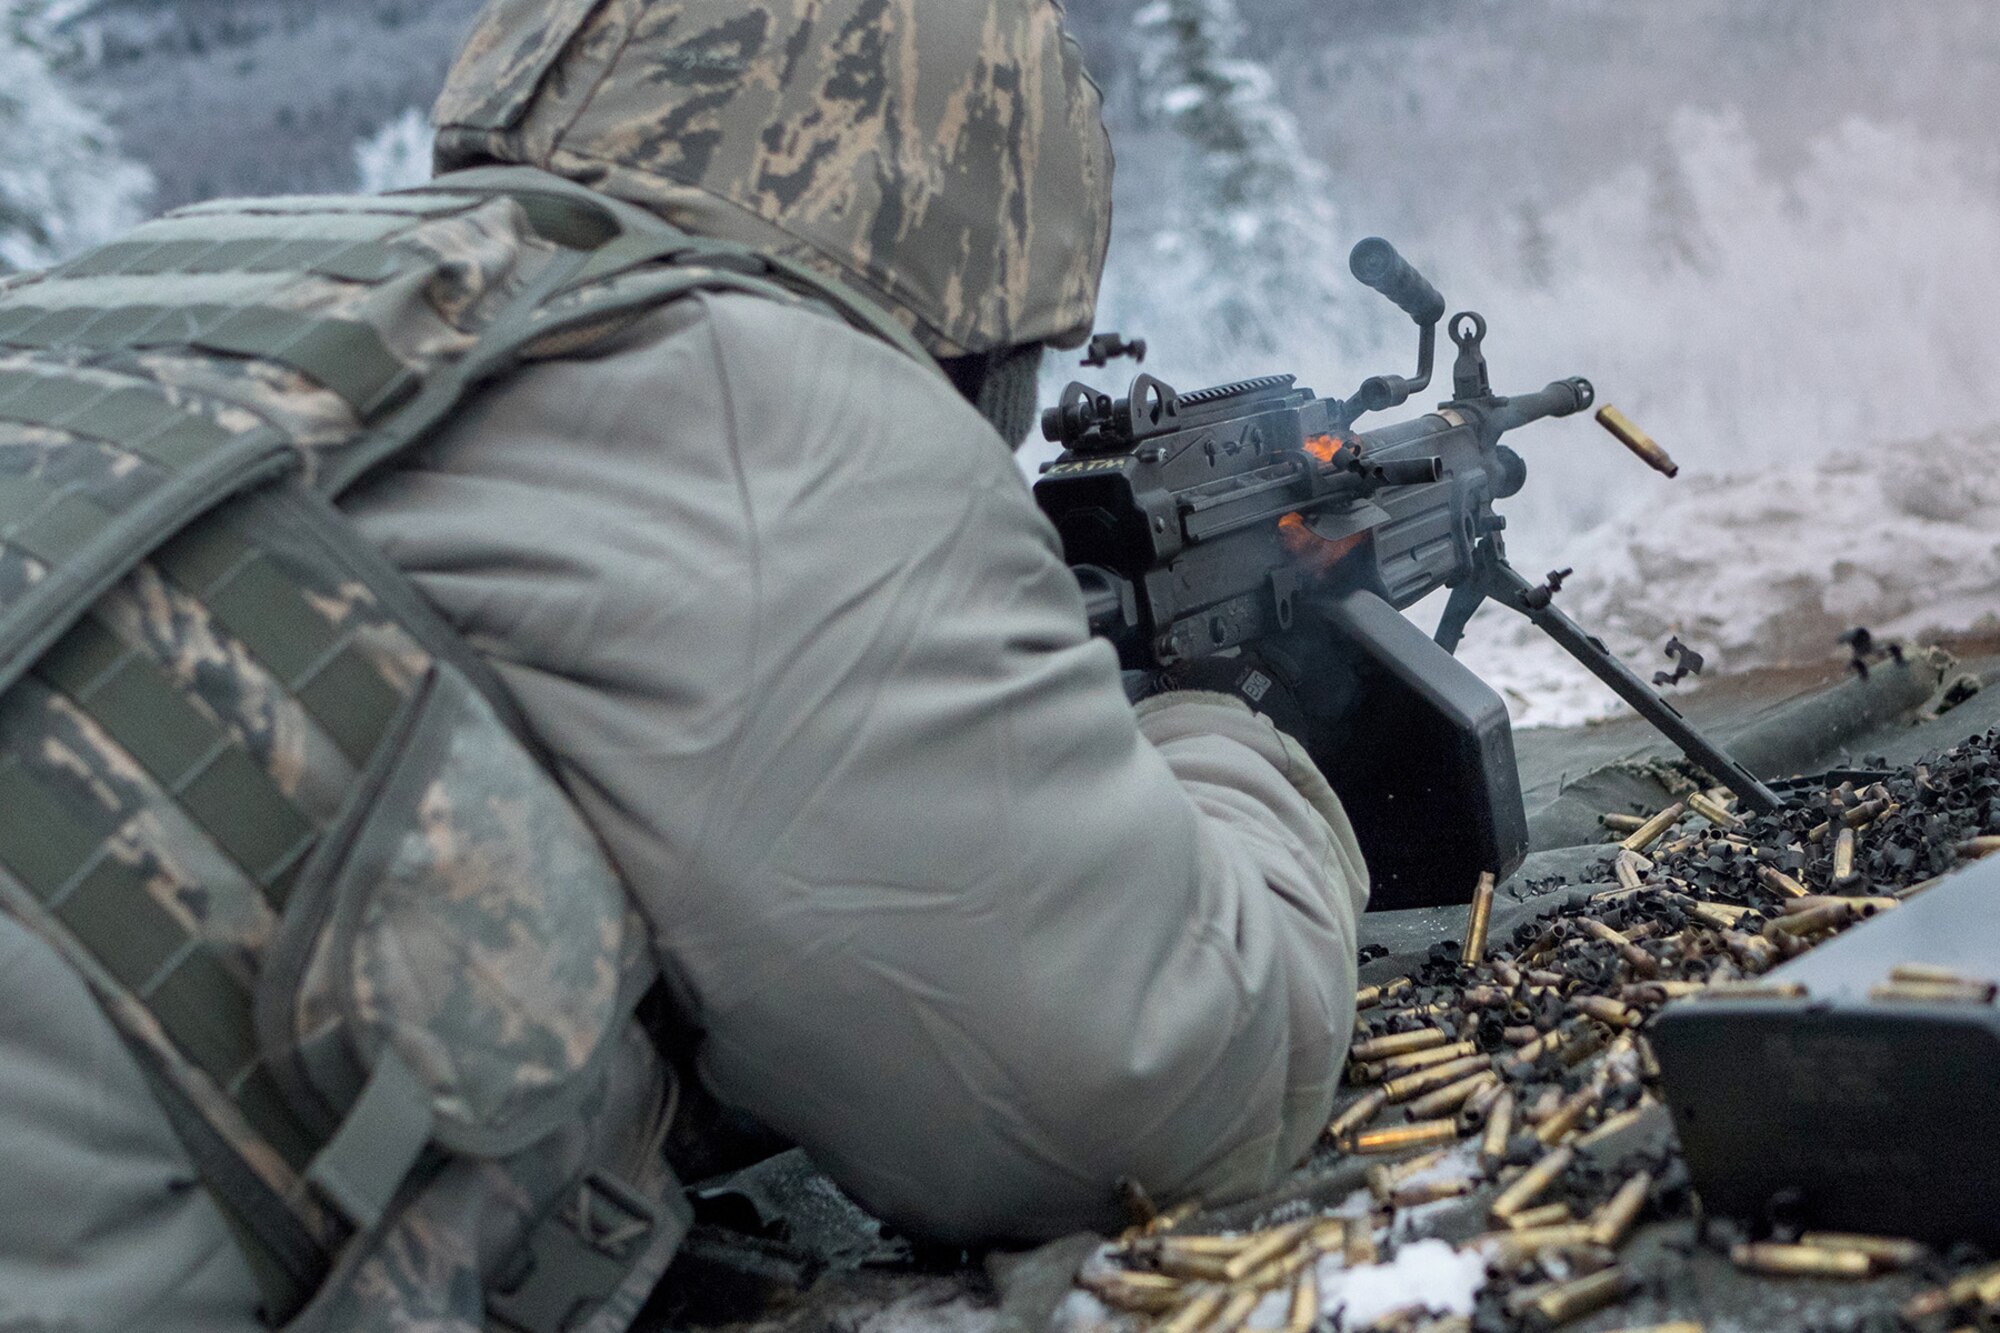 Airman 1st Class Benjie Duenas, a native of Saipan, assigned to the 673d Security Forces Squadron, fires at a target with an M249 Squad Automatic Weapon during a machine gun qualification range on Joint Base Elmendorf-Richardson, Alaska, Jan. 10, 2018. Security Forces Airmen perform extensive training in law enforcement as well as combat tactics to protect U.S. Military bases and assets both stateside and overseas.